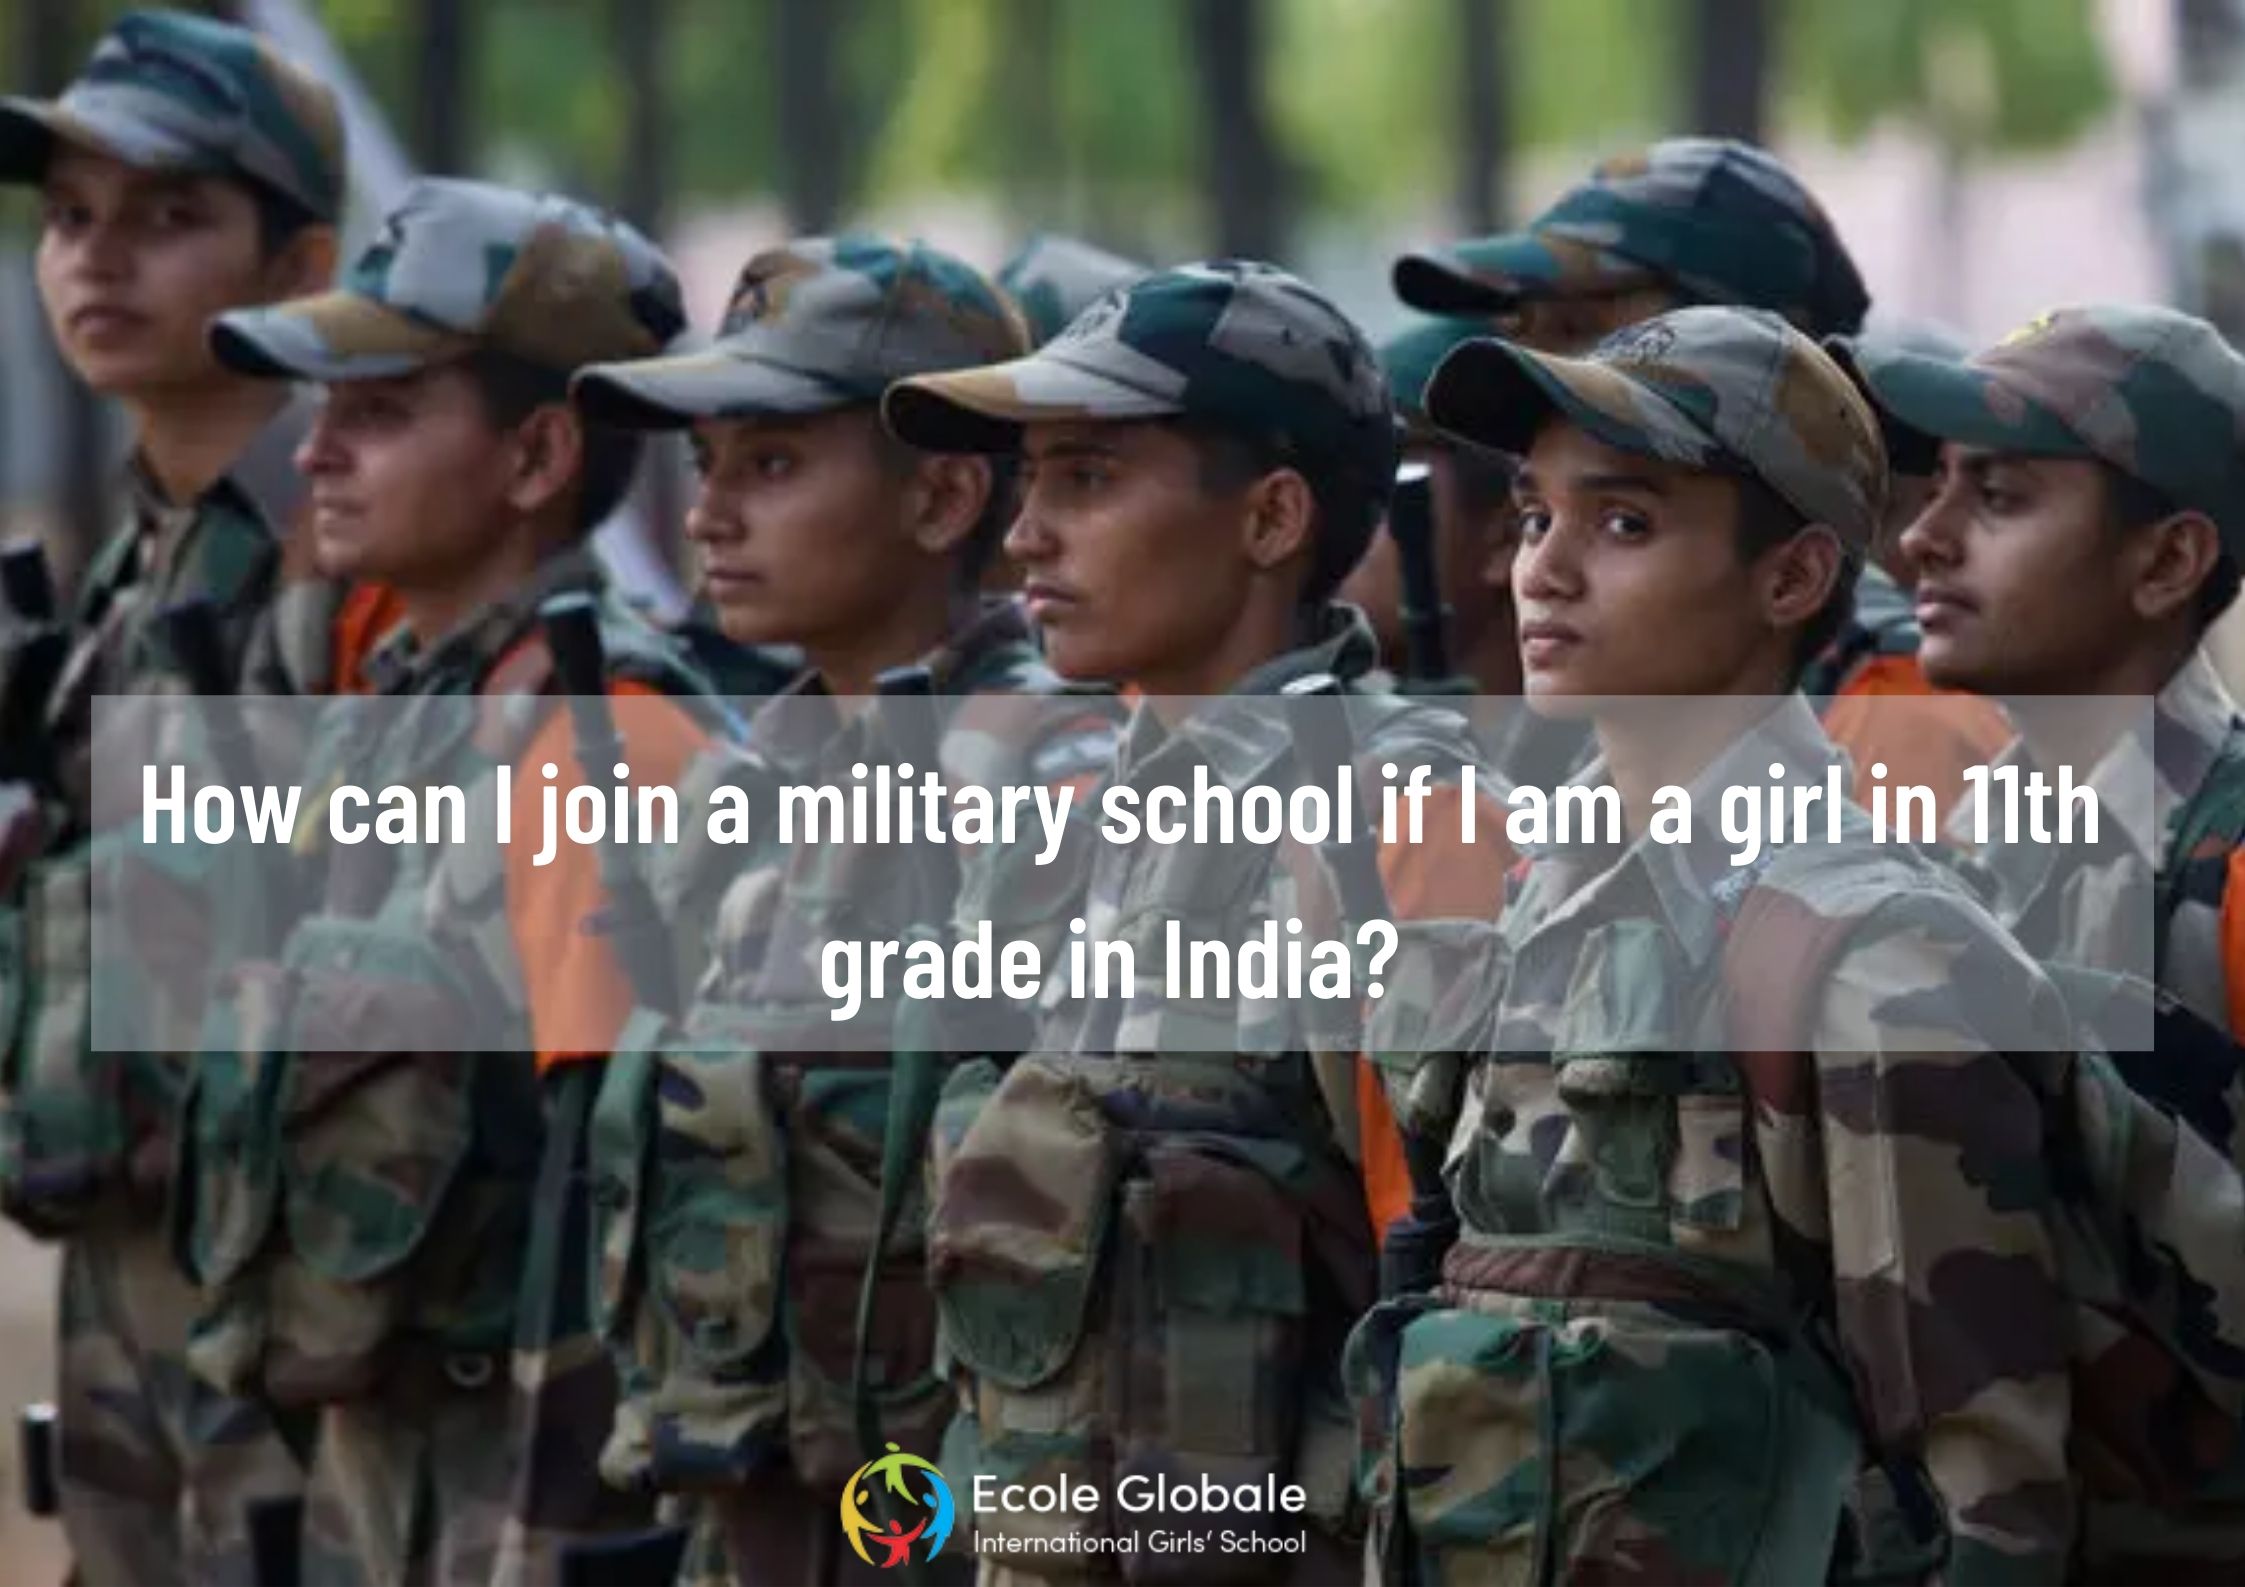 You are currently viewing How can I join a military school if I am a girl in 11th grade in India?